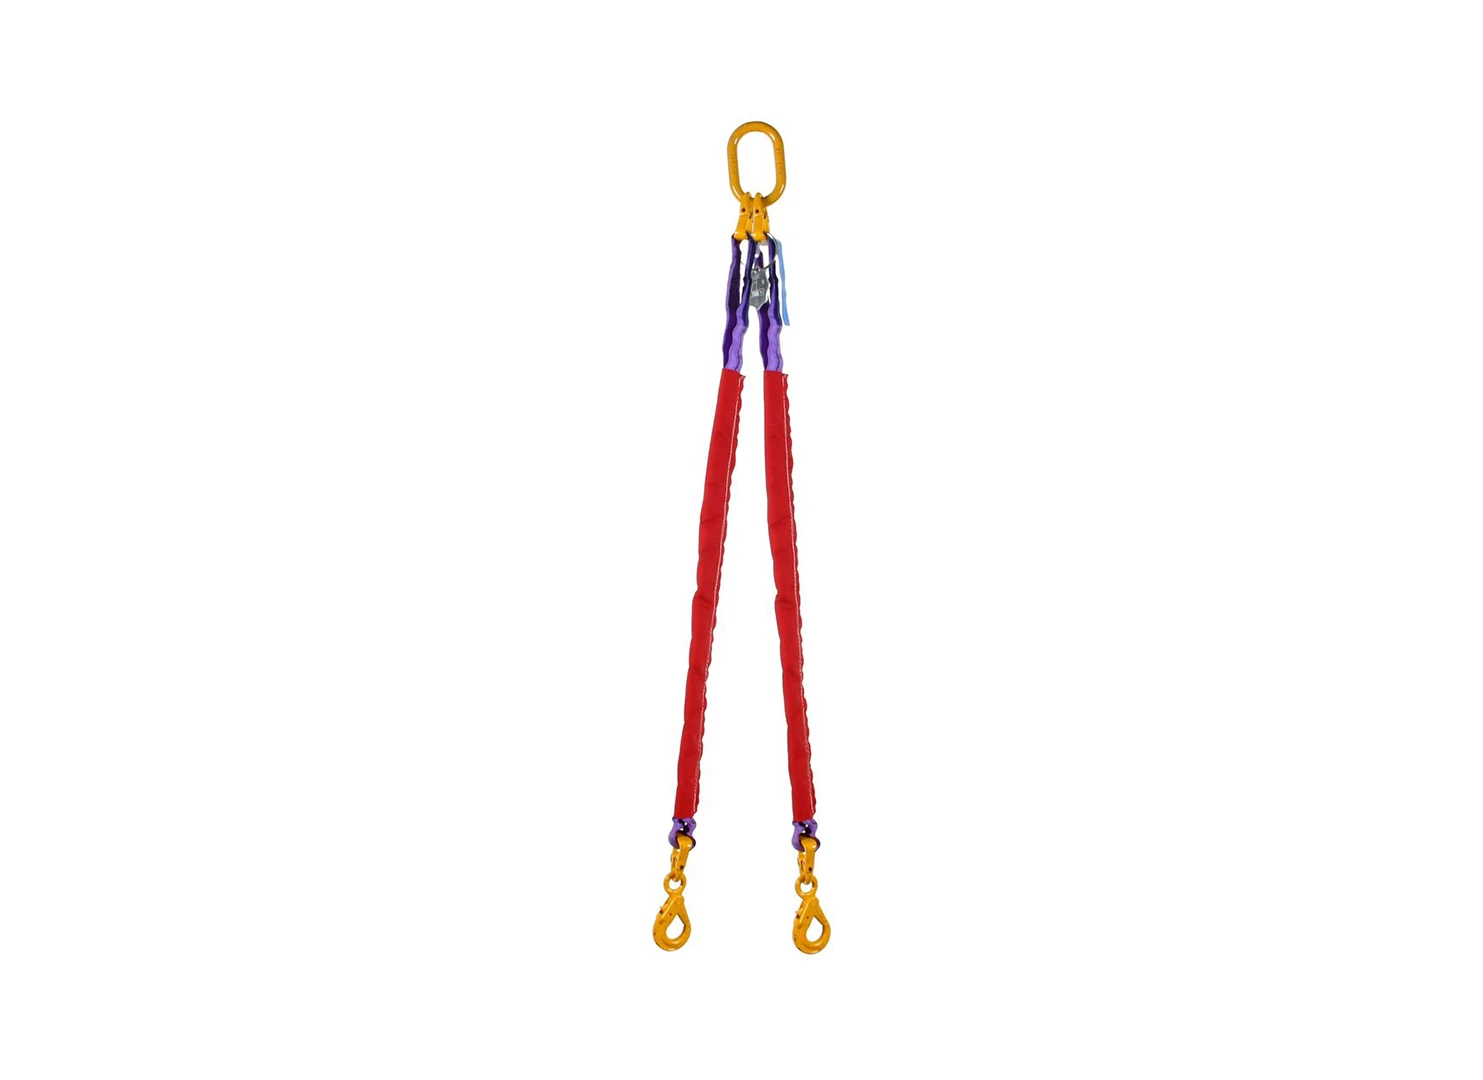 Product: Round slings 2 2.8t*2,3m